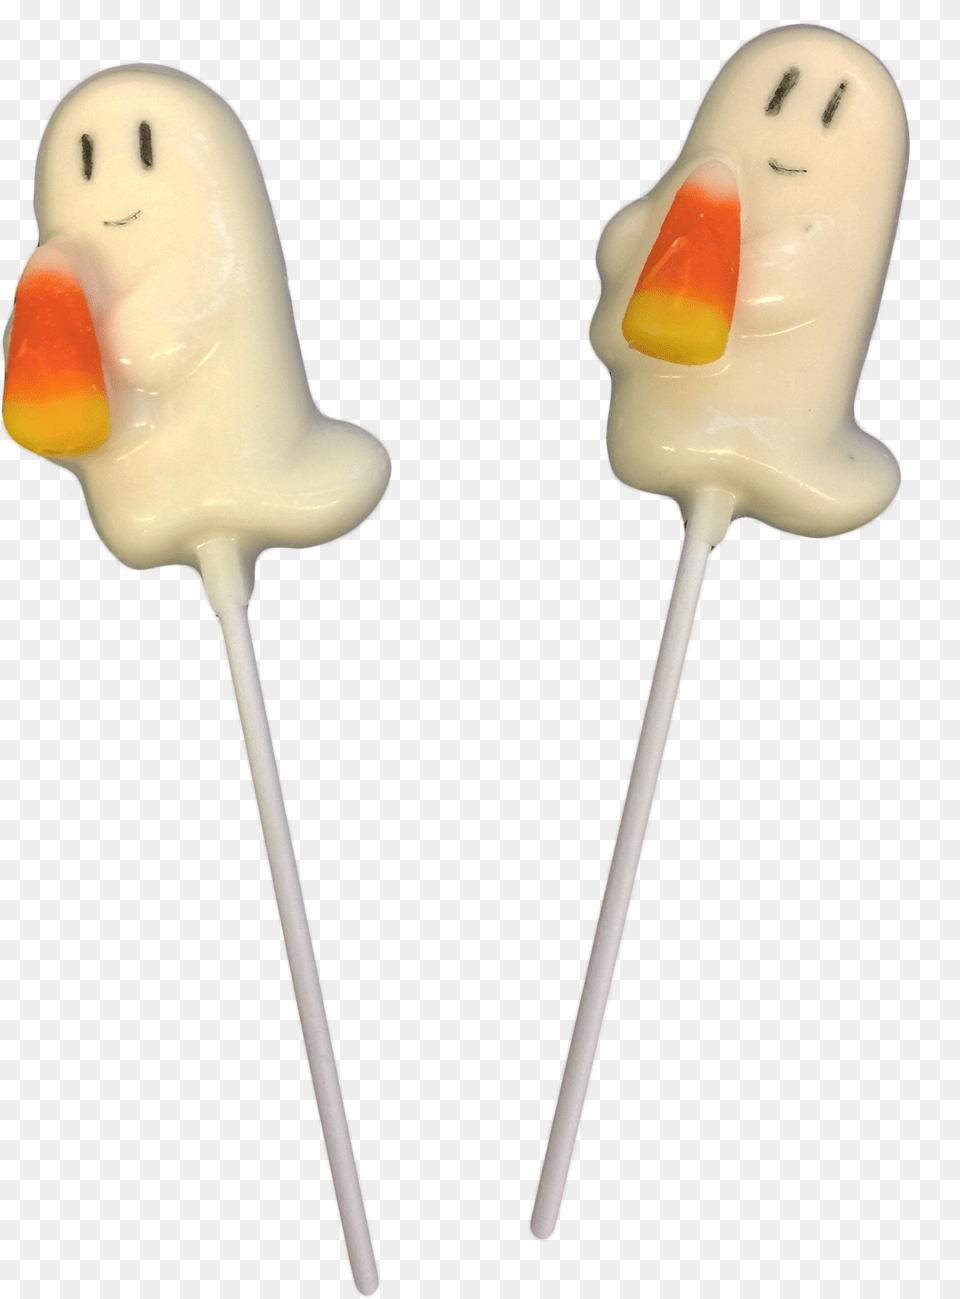 Lollipop Candy Ghost Lollipops, Food, Sweets, Animal, Bird Free Transparent Png